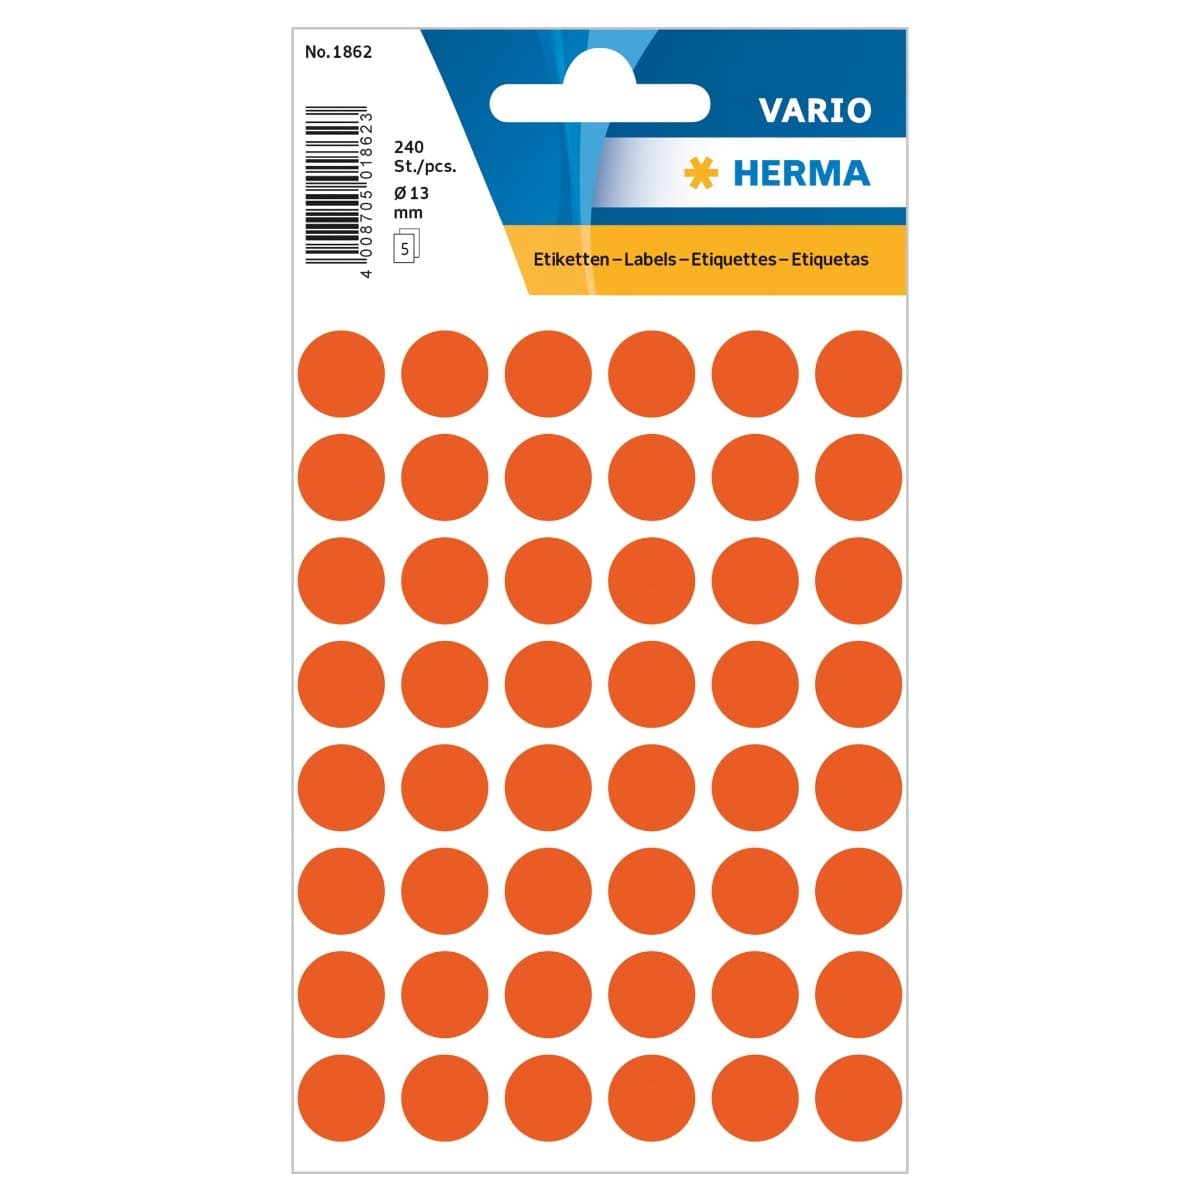 Herma Vario Sticker Color Dots, 13 mm, 240/pack, Red